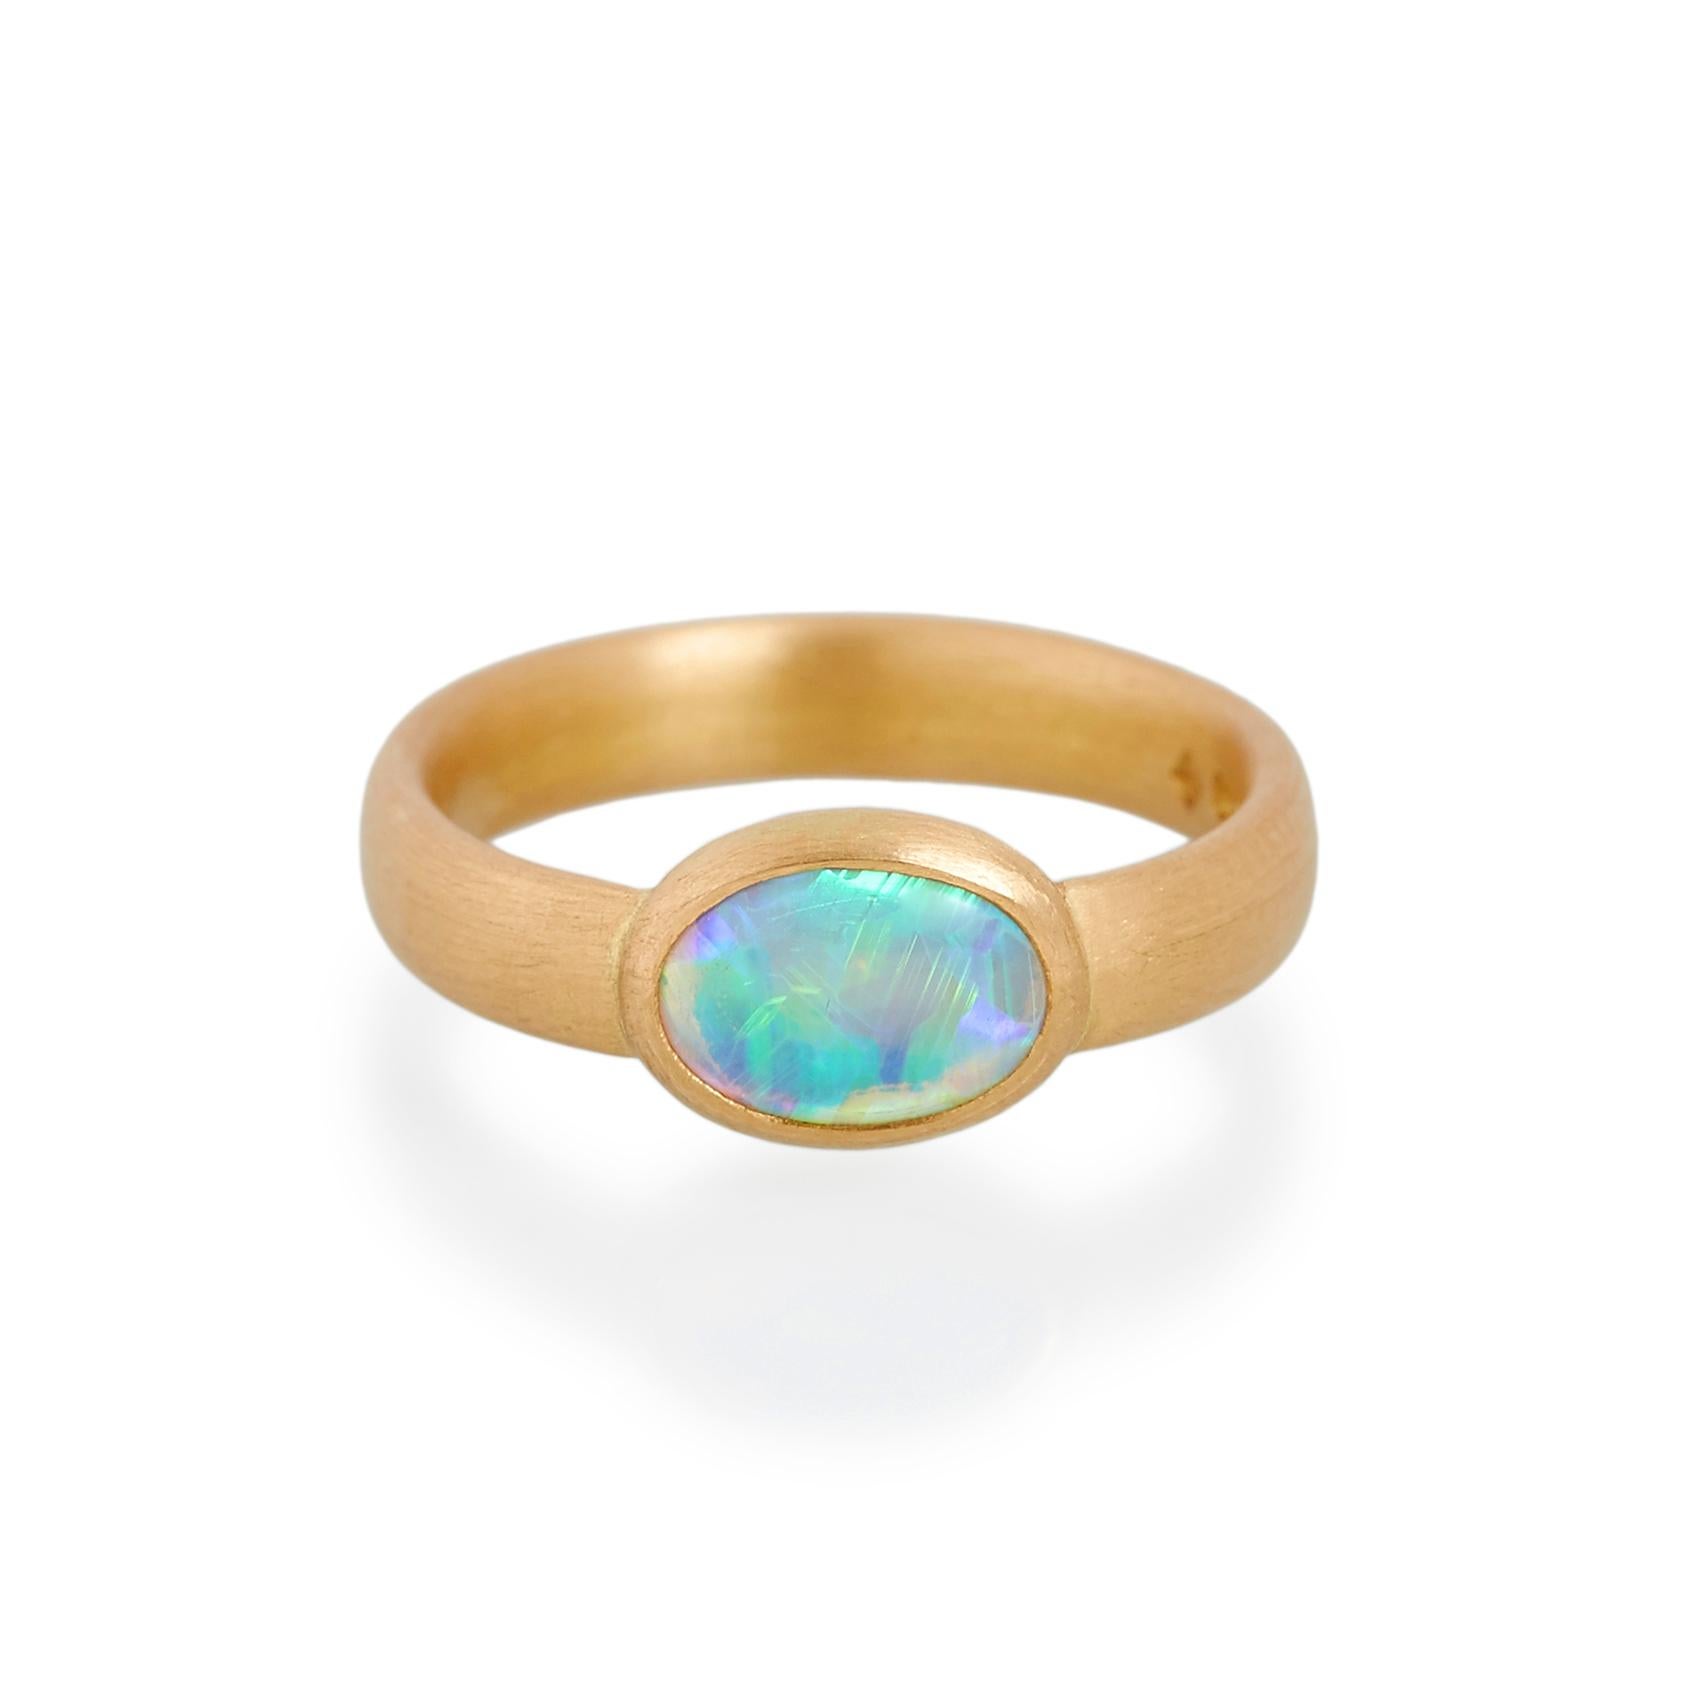 Cabochon opal ring.
Ref: G15007

9mm x 6mm natural opal  
22ct gold

Cadby & Co are a family business that specialise in reusing & up cycling old cut diamonds and fine gem stones. Deborah Cadby’s designs and skills in making are combined with Jeff